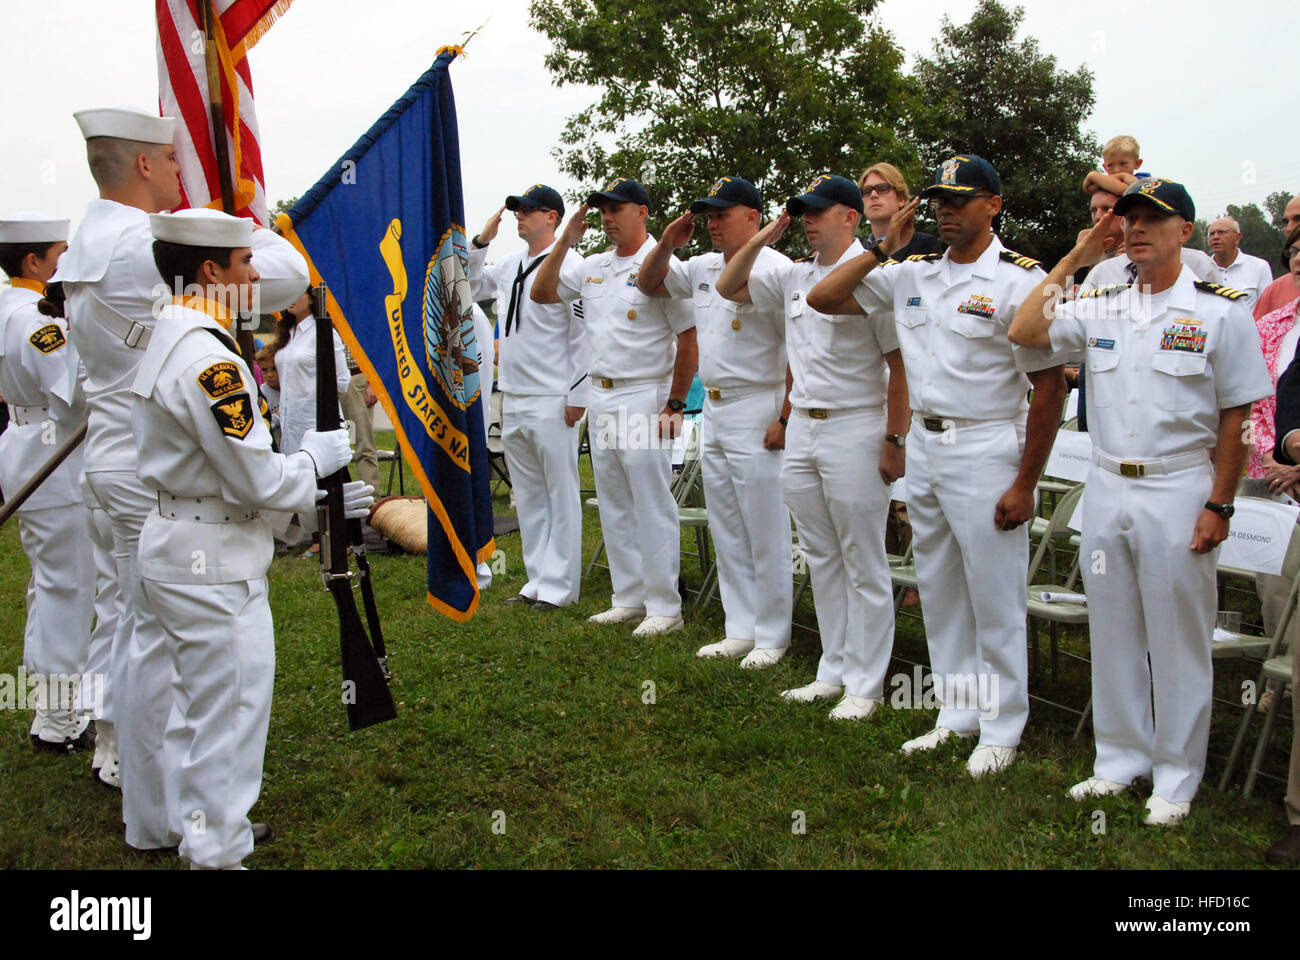 150829-N-ZZ999-991 MONROE, Mich. (Aug. 29 2015) – Sailors assigned to Littoral Combat Ship Crew 103 Pre-Commissioning Unit Detroit render honors as members of a local U.S. Navy Sea Cadet Corps present the colors at the River Raisin Battlefield Park in Monroe, Mich., Aug. 29 as part of Navy Week Detroit. Navy Weeks focus a variety of assets, equipment and personnel on a single city for a week-long series of engagements designed to bring America's Navy closer to the people it protects, in cities that don't have a large naval presence. (U.S. Navy photo by Mass Communication Specialist 1st Class D Stock Photo